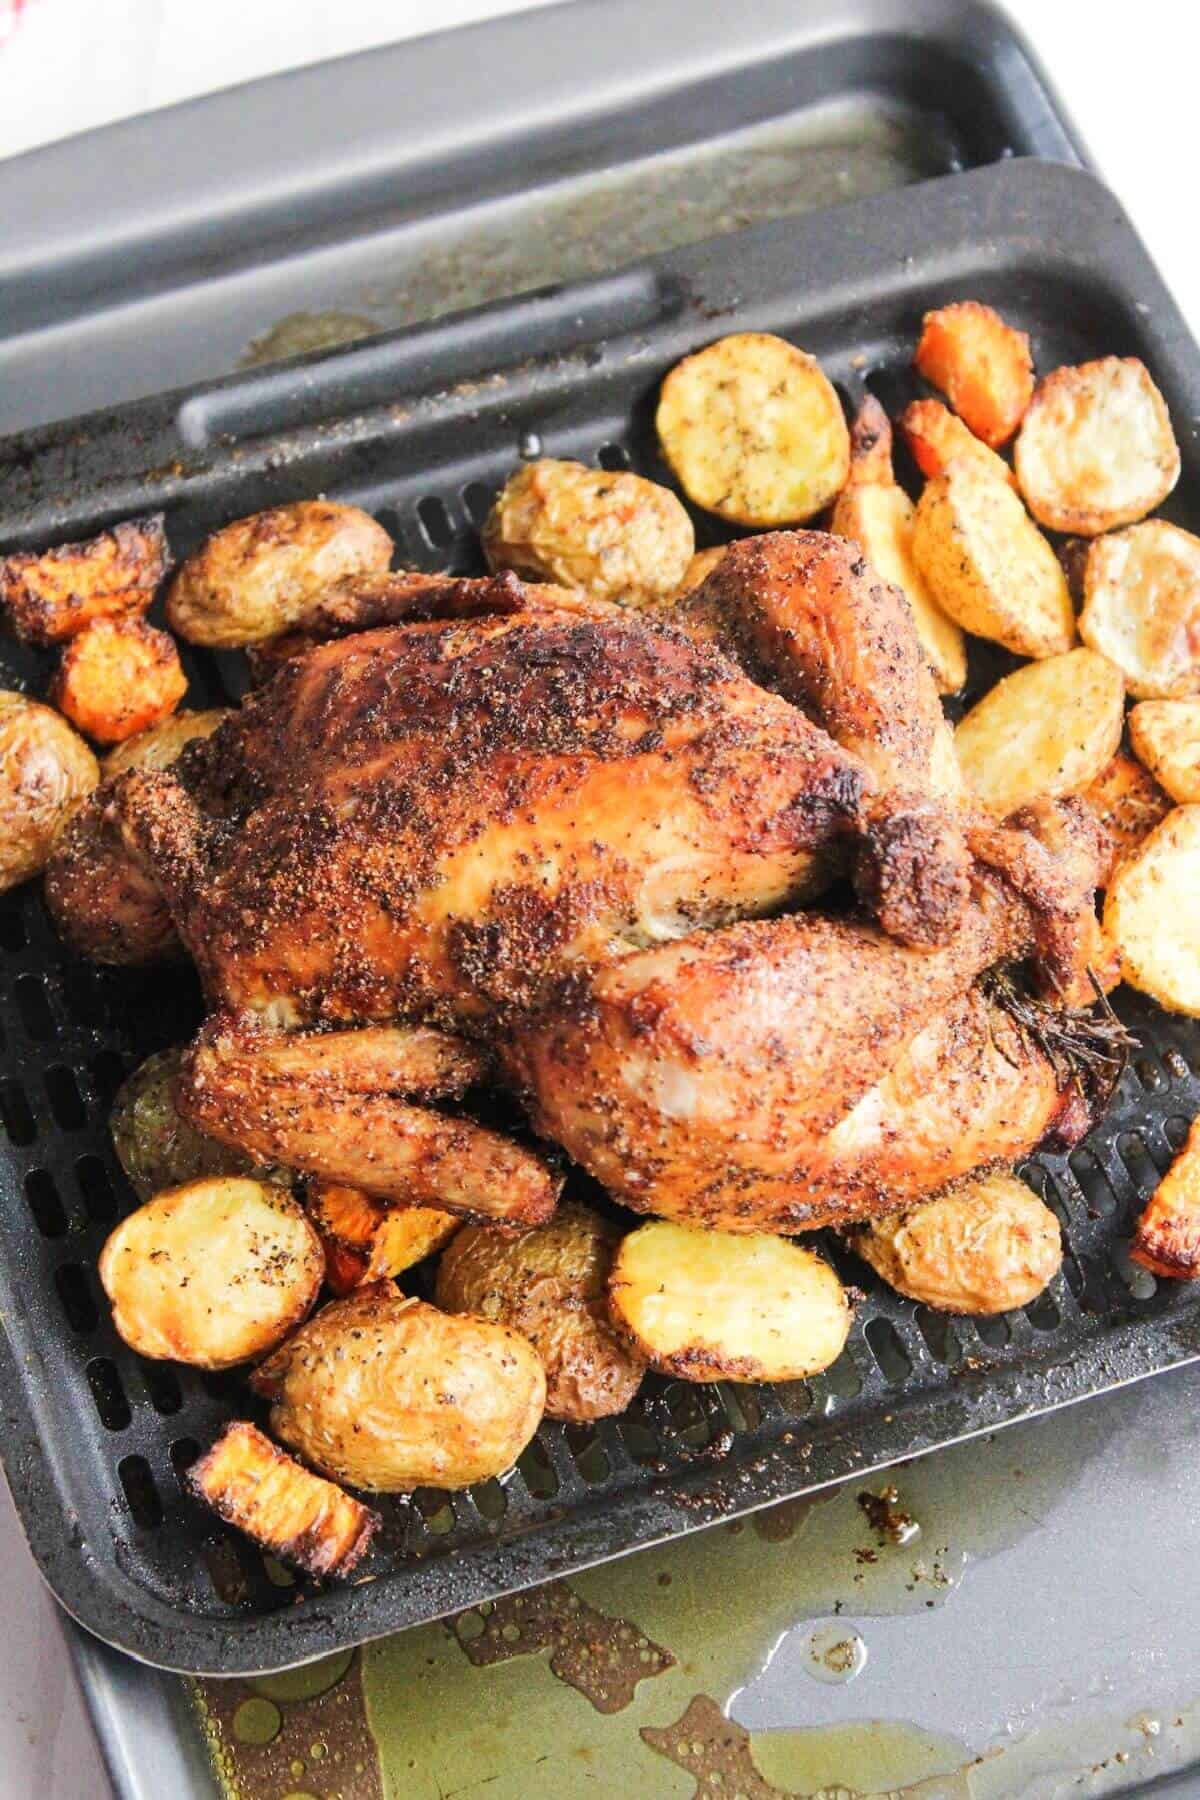 Whole chicken with roasted potatoes and carrots on an air fryer tray.